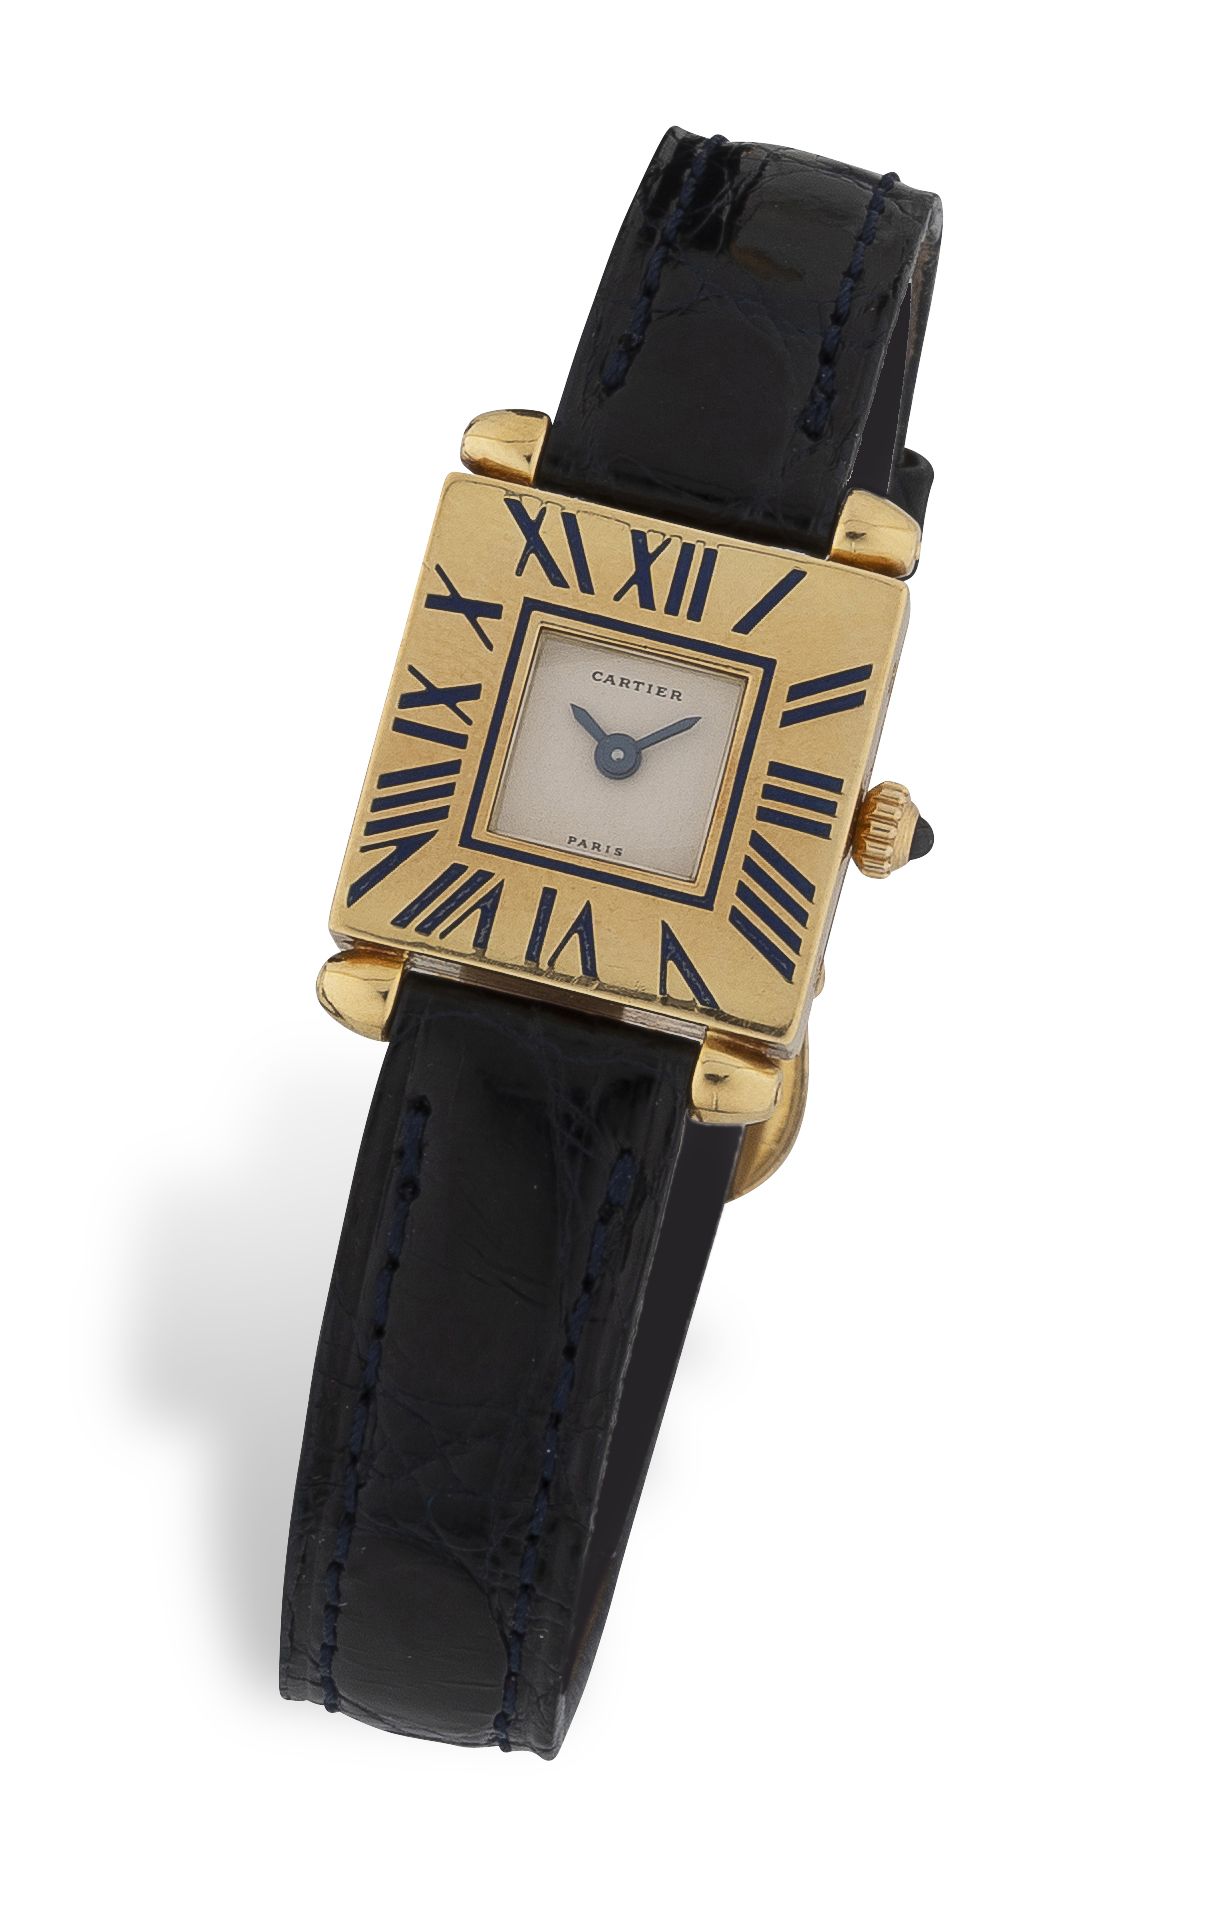 CARTIER "QUADRANT" Ladies' wristwatch in yellow gold (750).

White dial signed a&hellip;